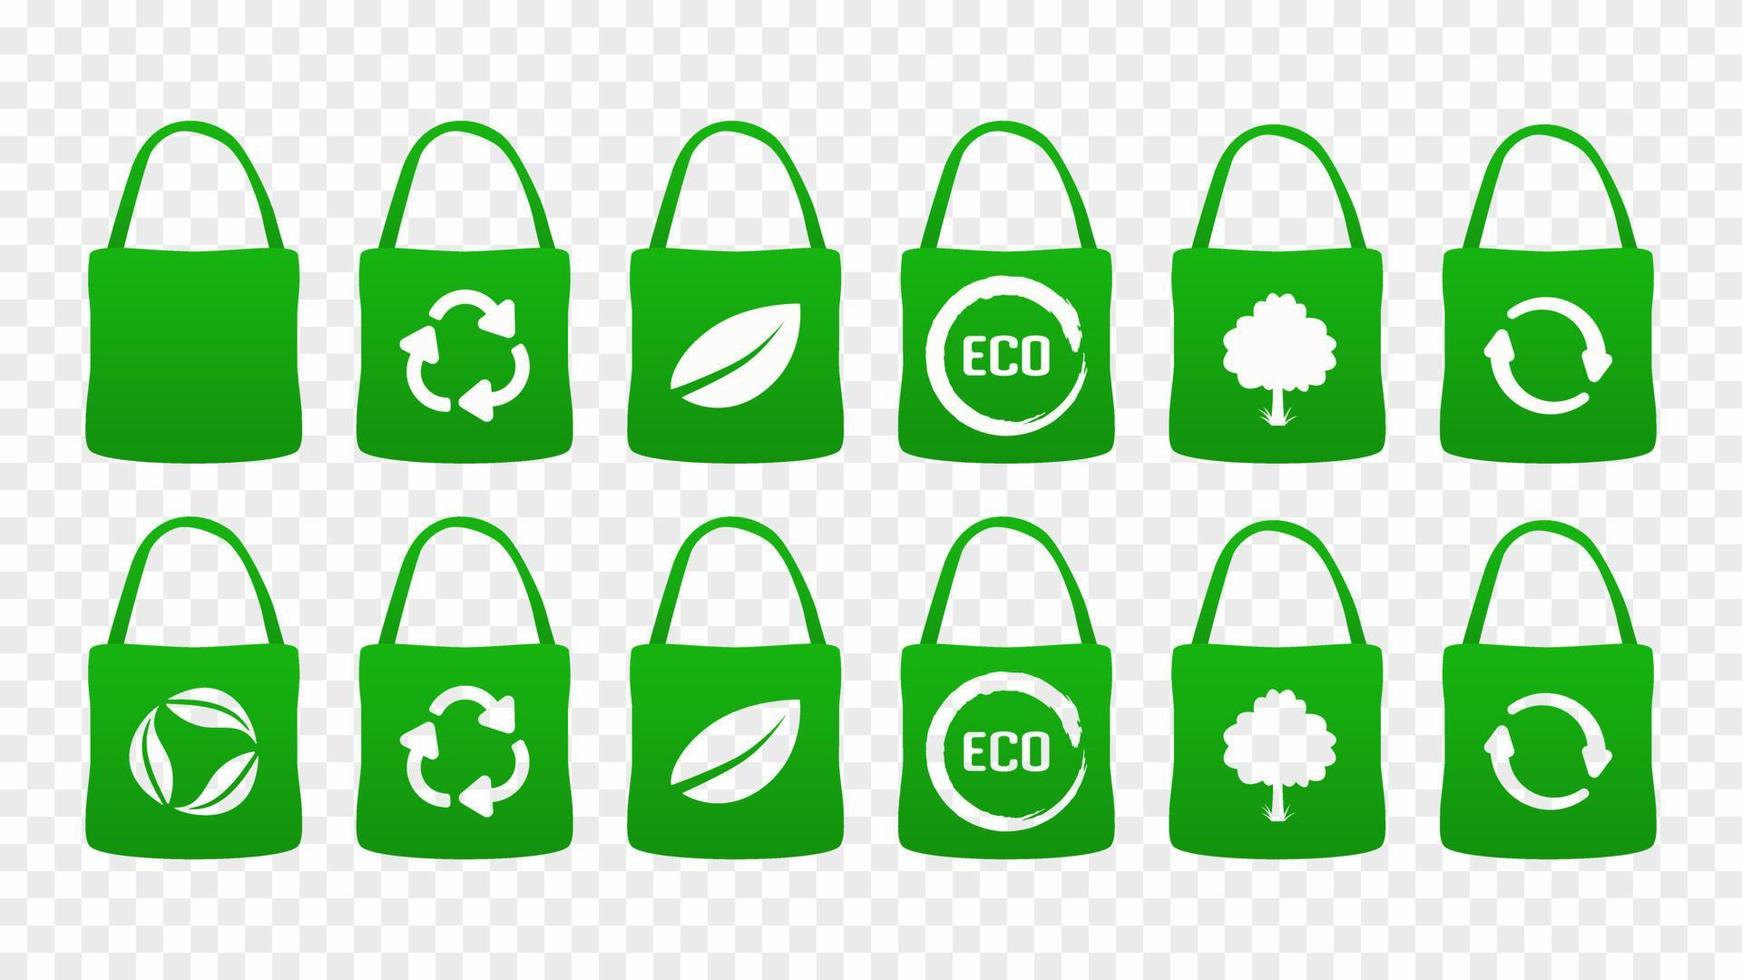 Eco organic bags. Green natural leaf package made from natural bio raw materials with decaying plastic reusable cycle use without environmental pollution convenient shopping trips ecology vector